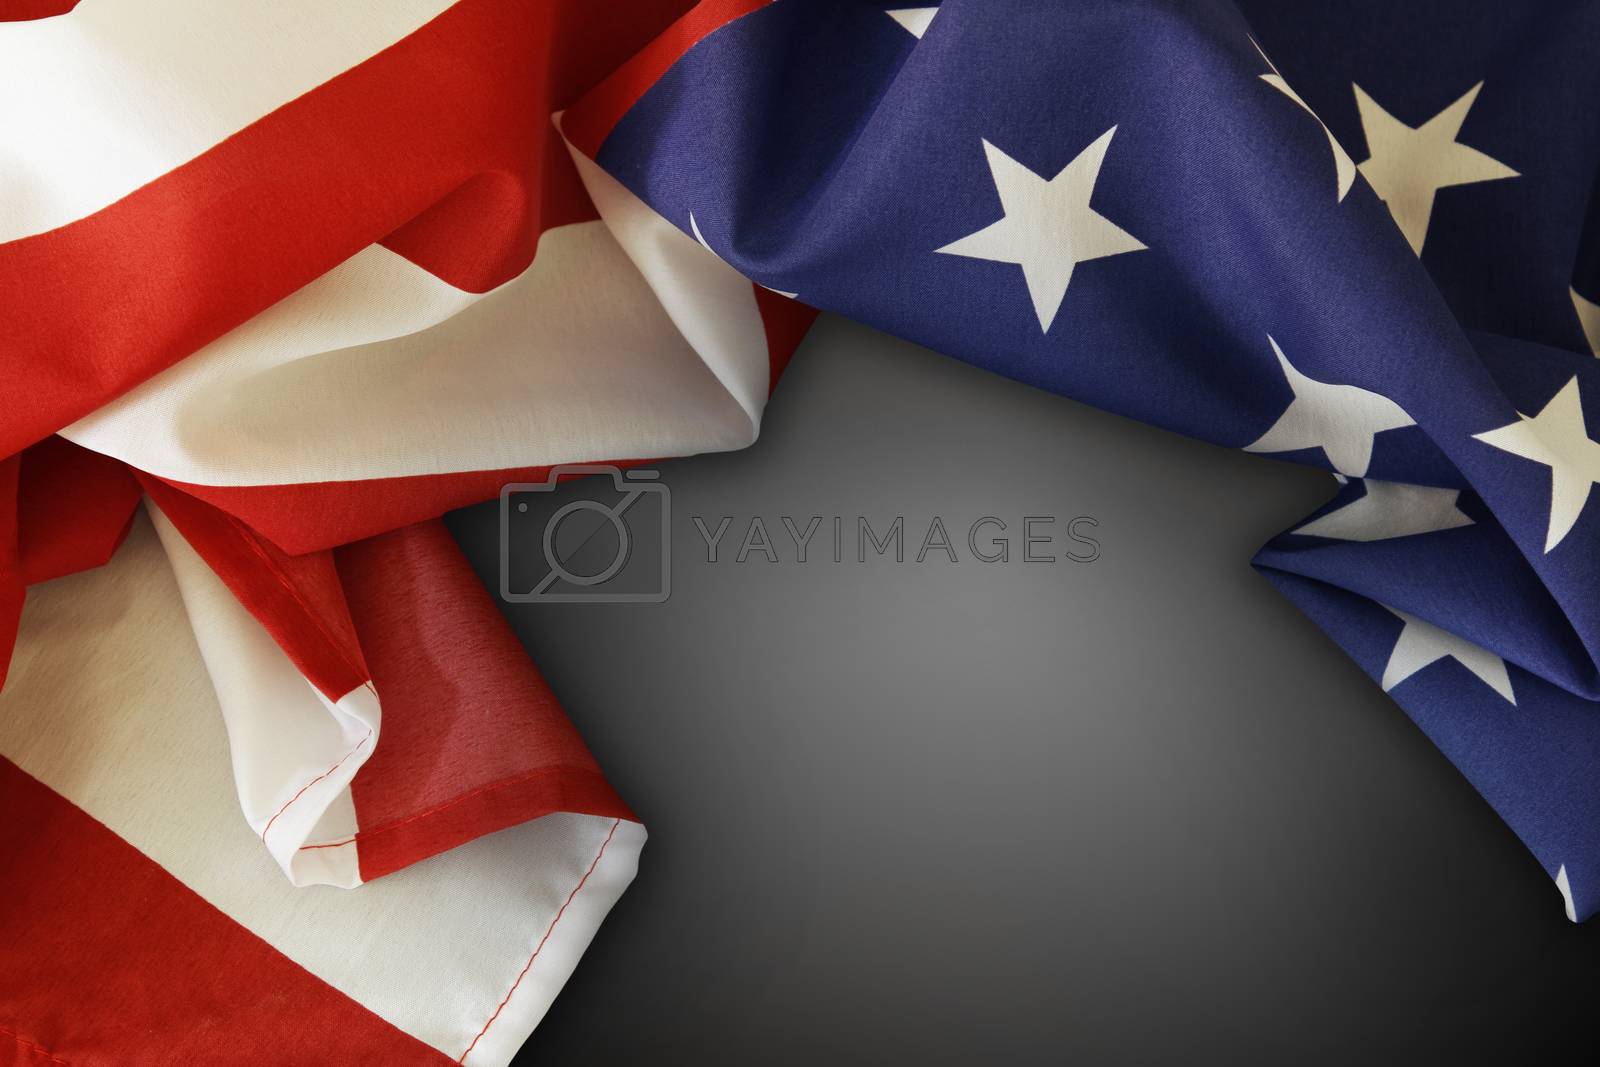 Royalty free image of American flag by Stillfx